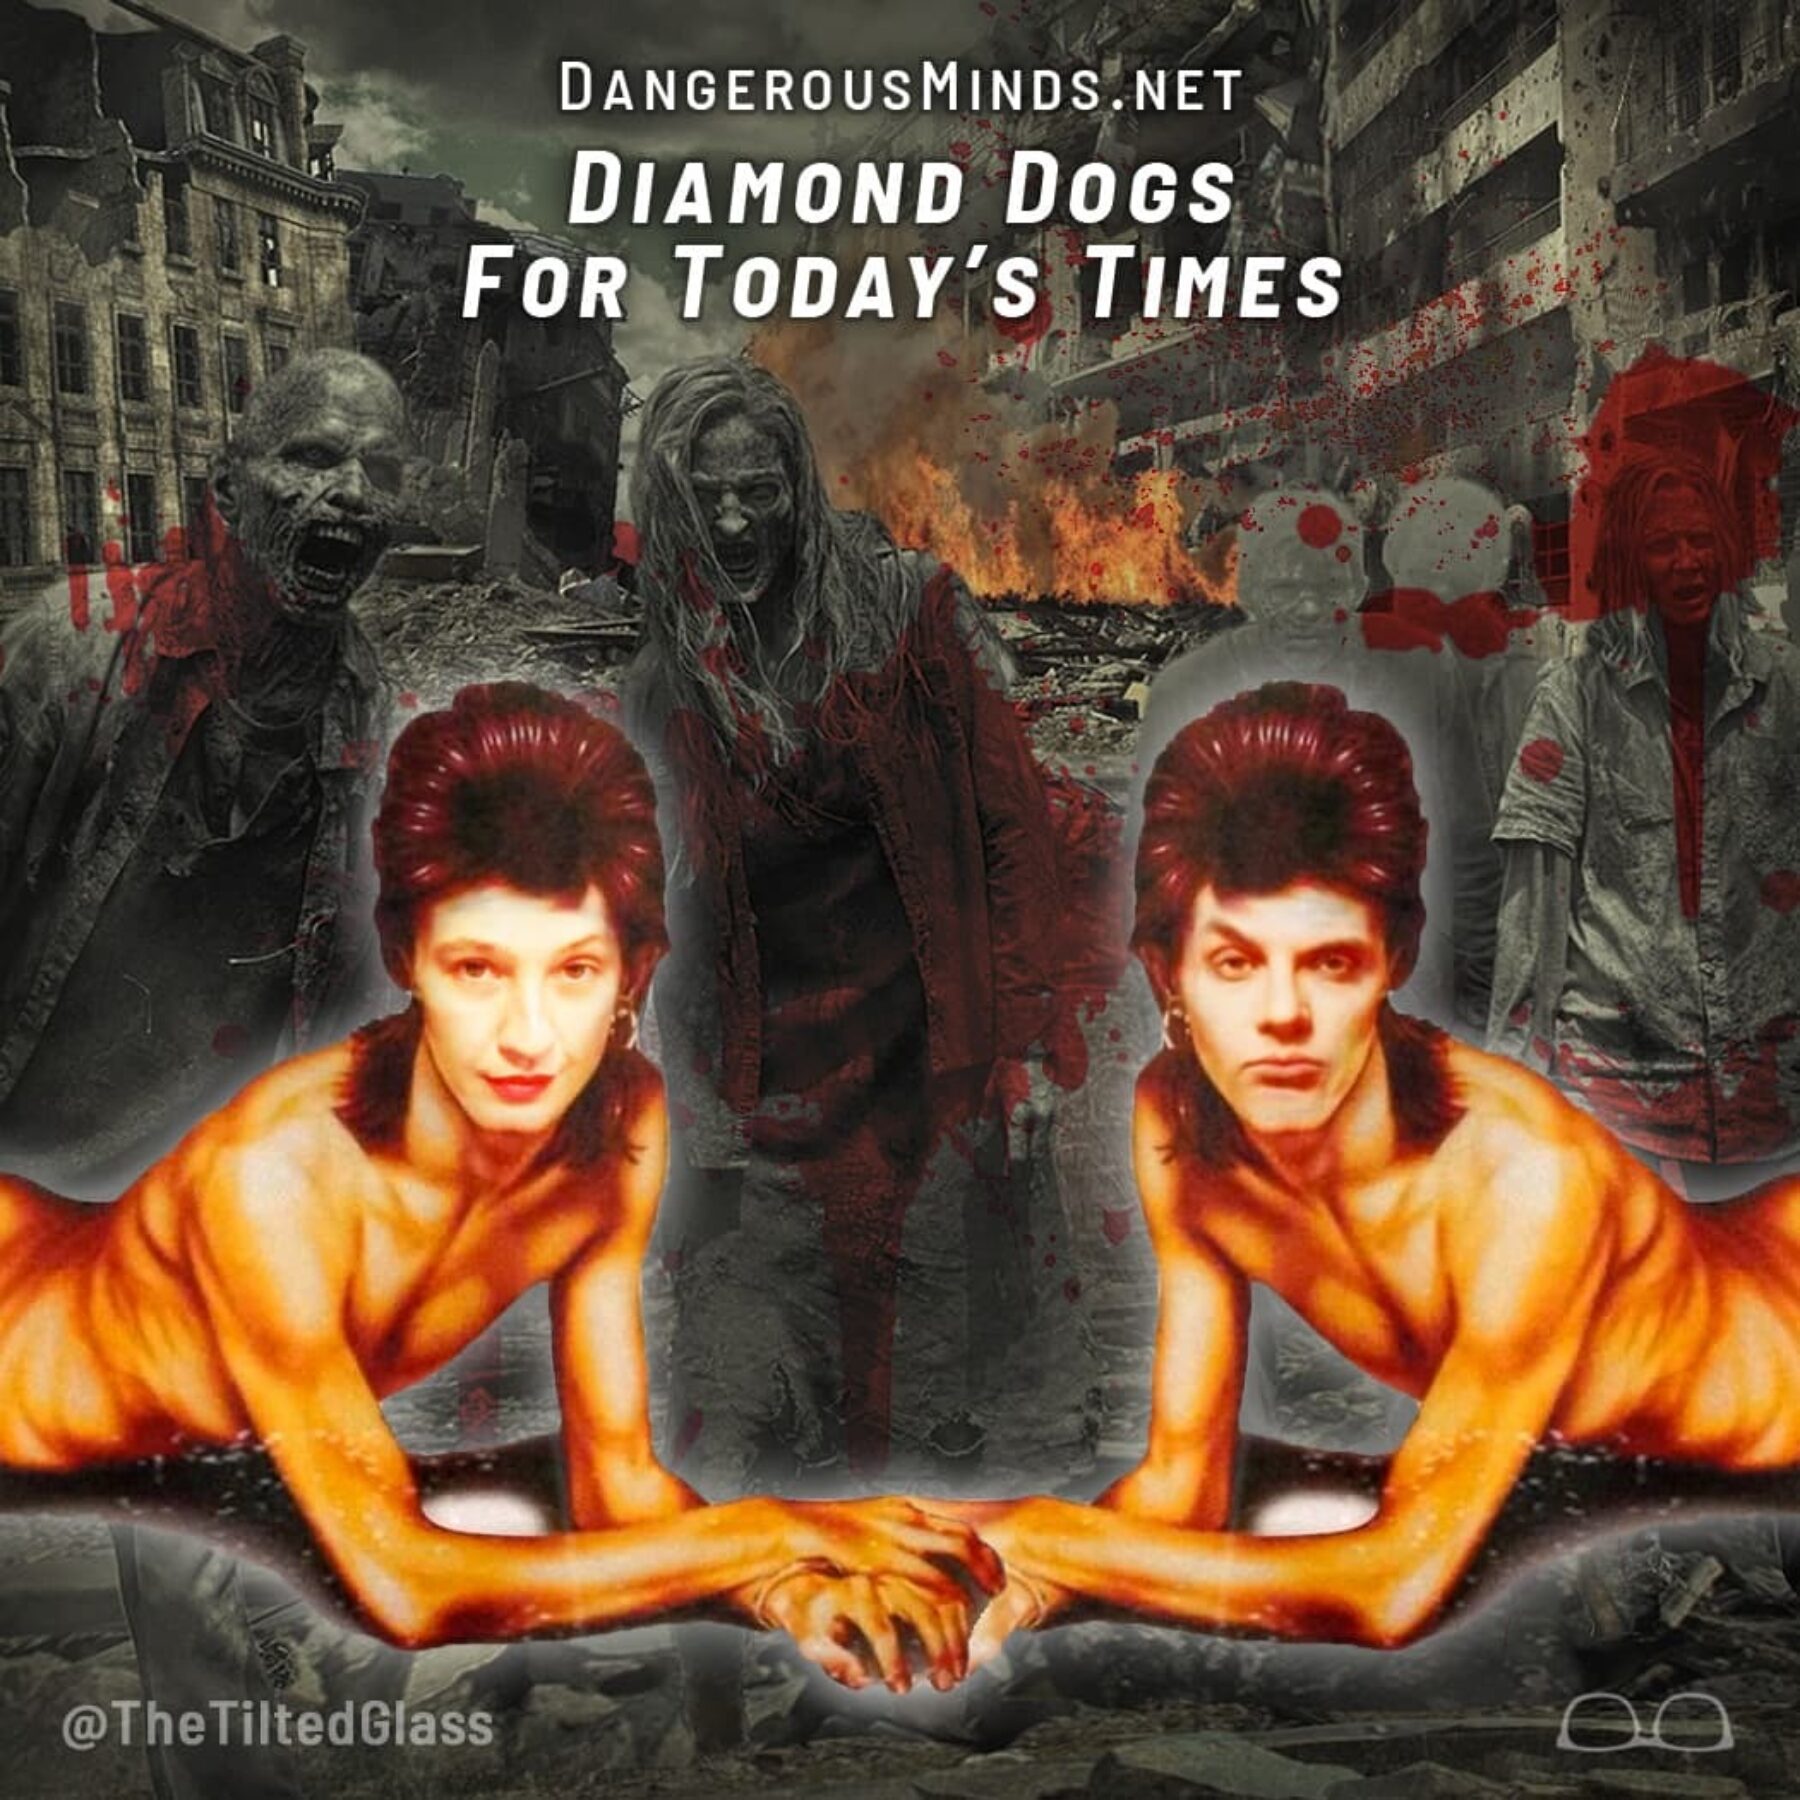 Diamond Dogs For Today’s Times - DangerousMinds.net